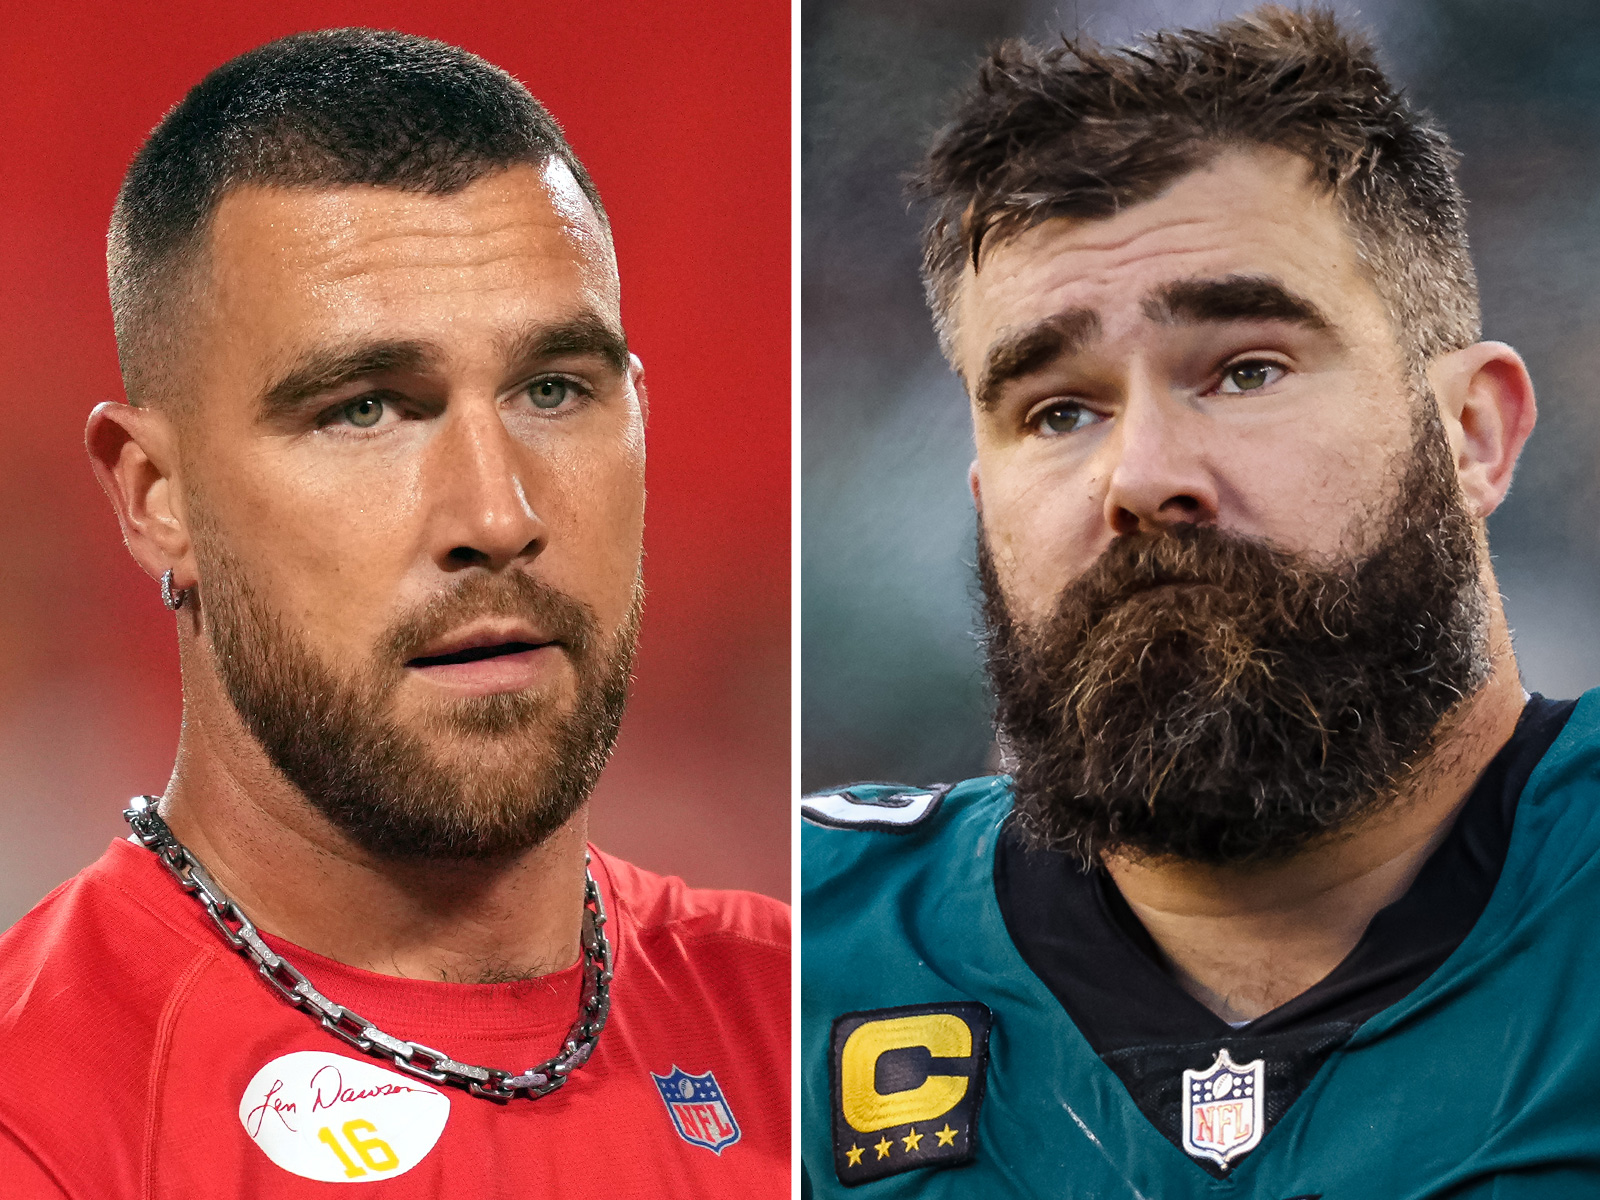 NFL's Kelce Brothers Reveal Secrets to Making a Great Head Coach